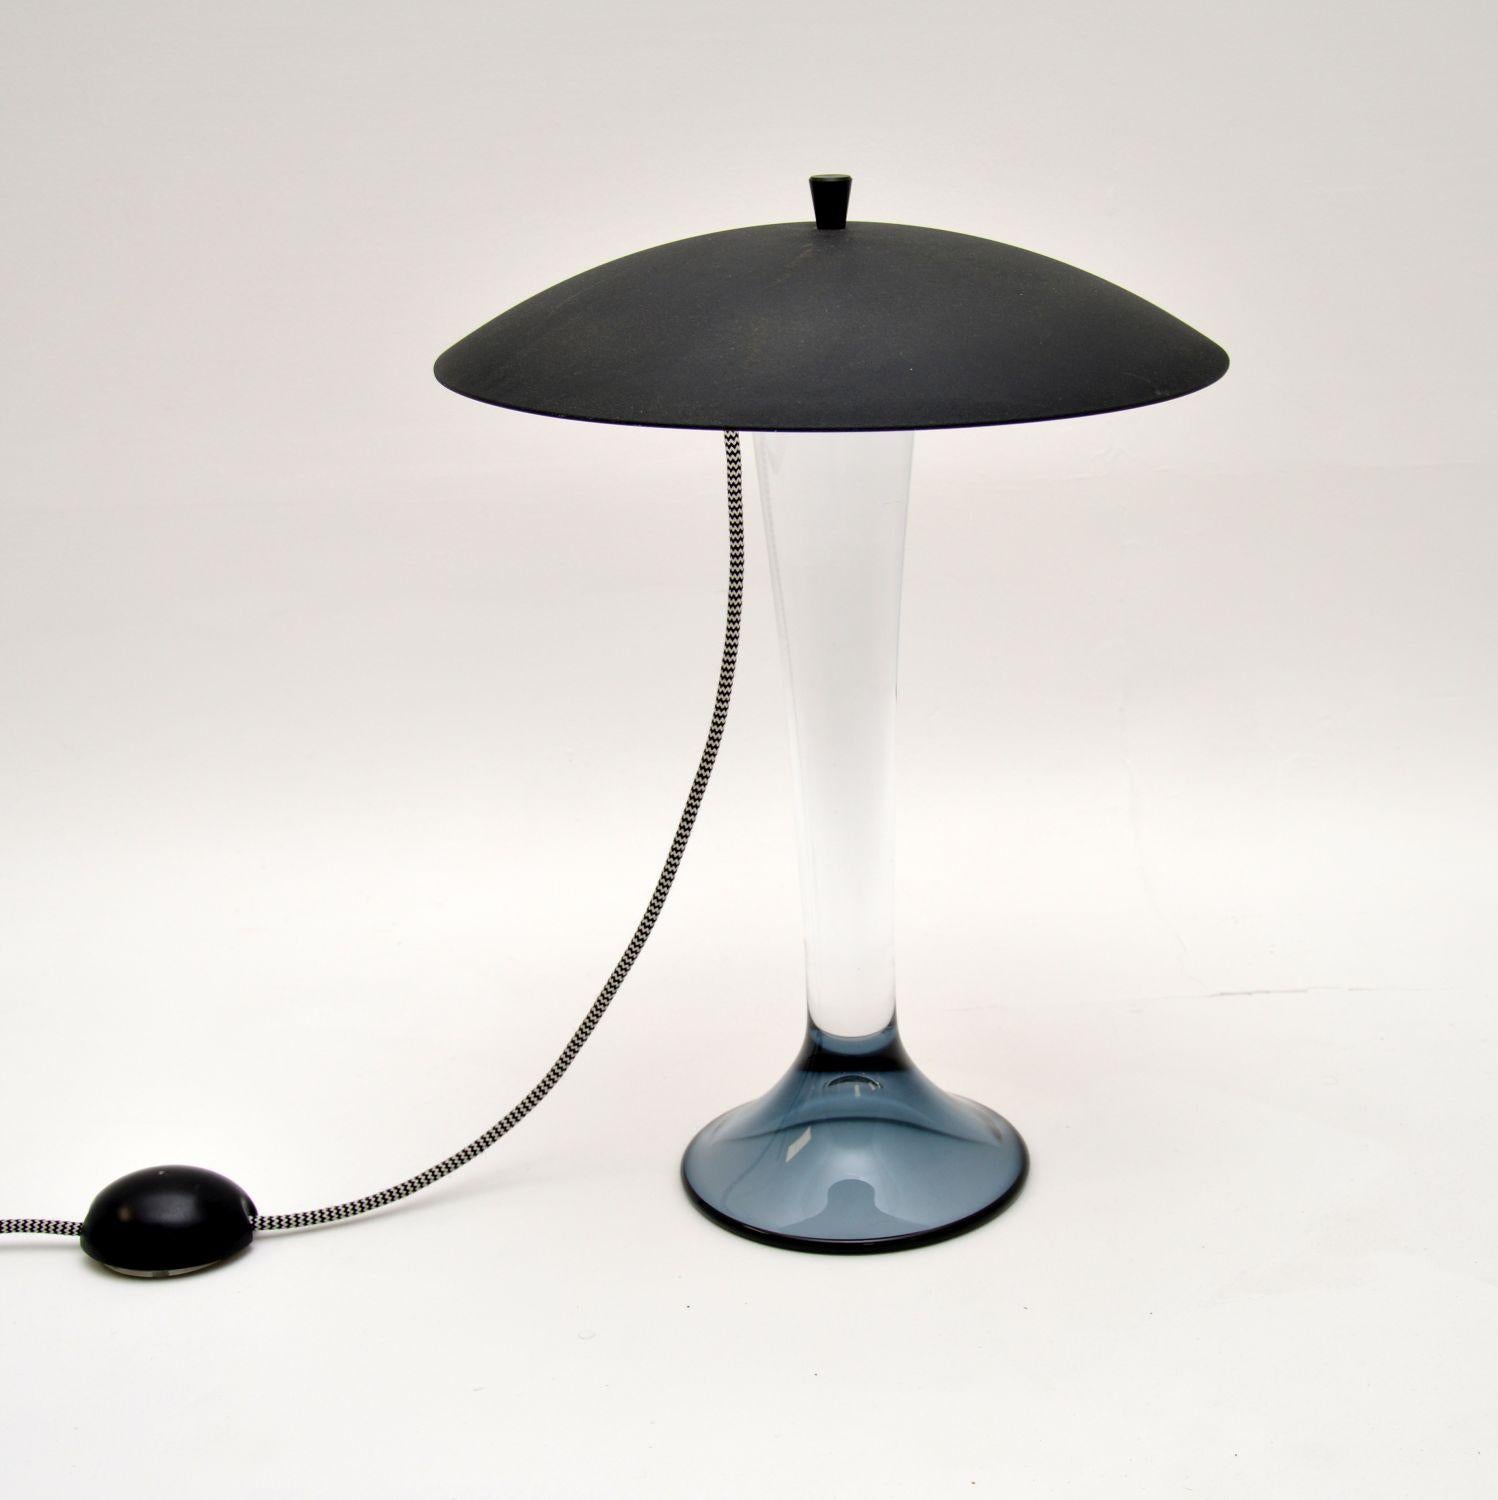 A stunning original Swedish glass table lamp, designed by Goran Warff for Kosta Boda. It was made in Sweden and dates from the late 20th/early 21st century.

This is a stunning design and is of amazing quality. It is in fantastic overall